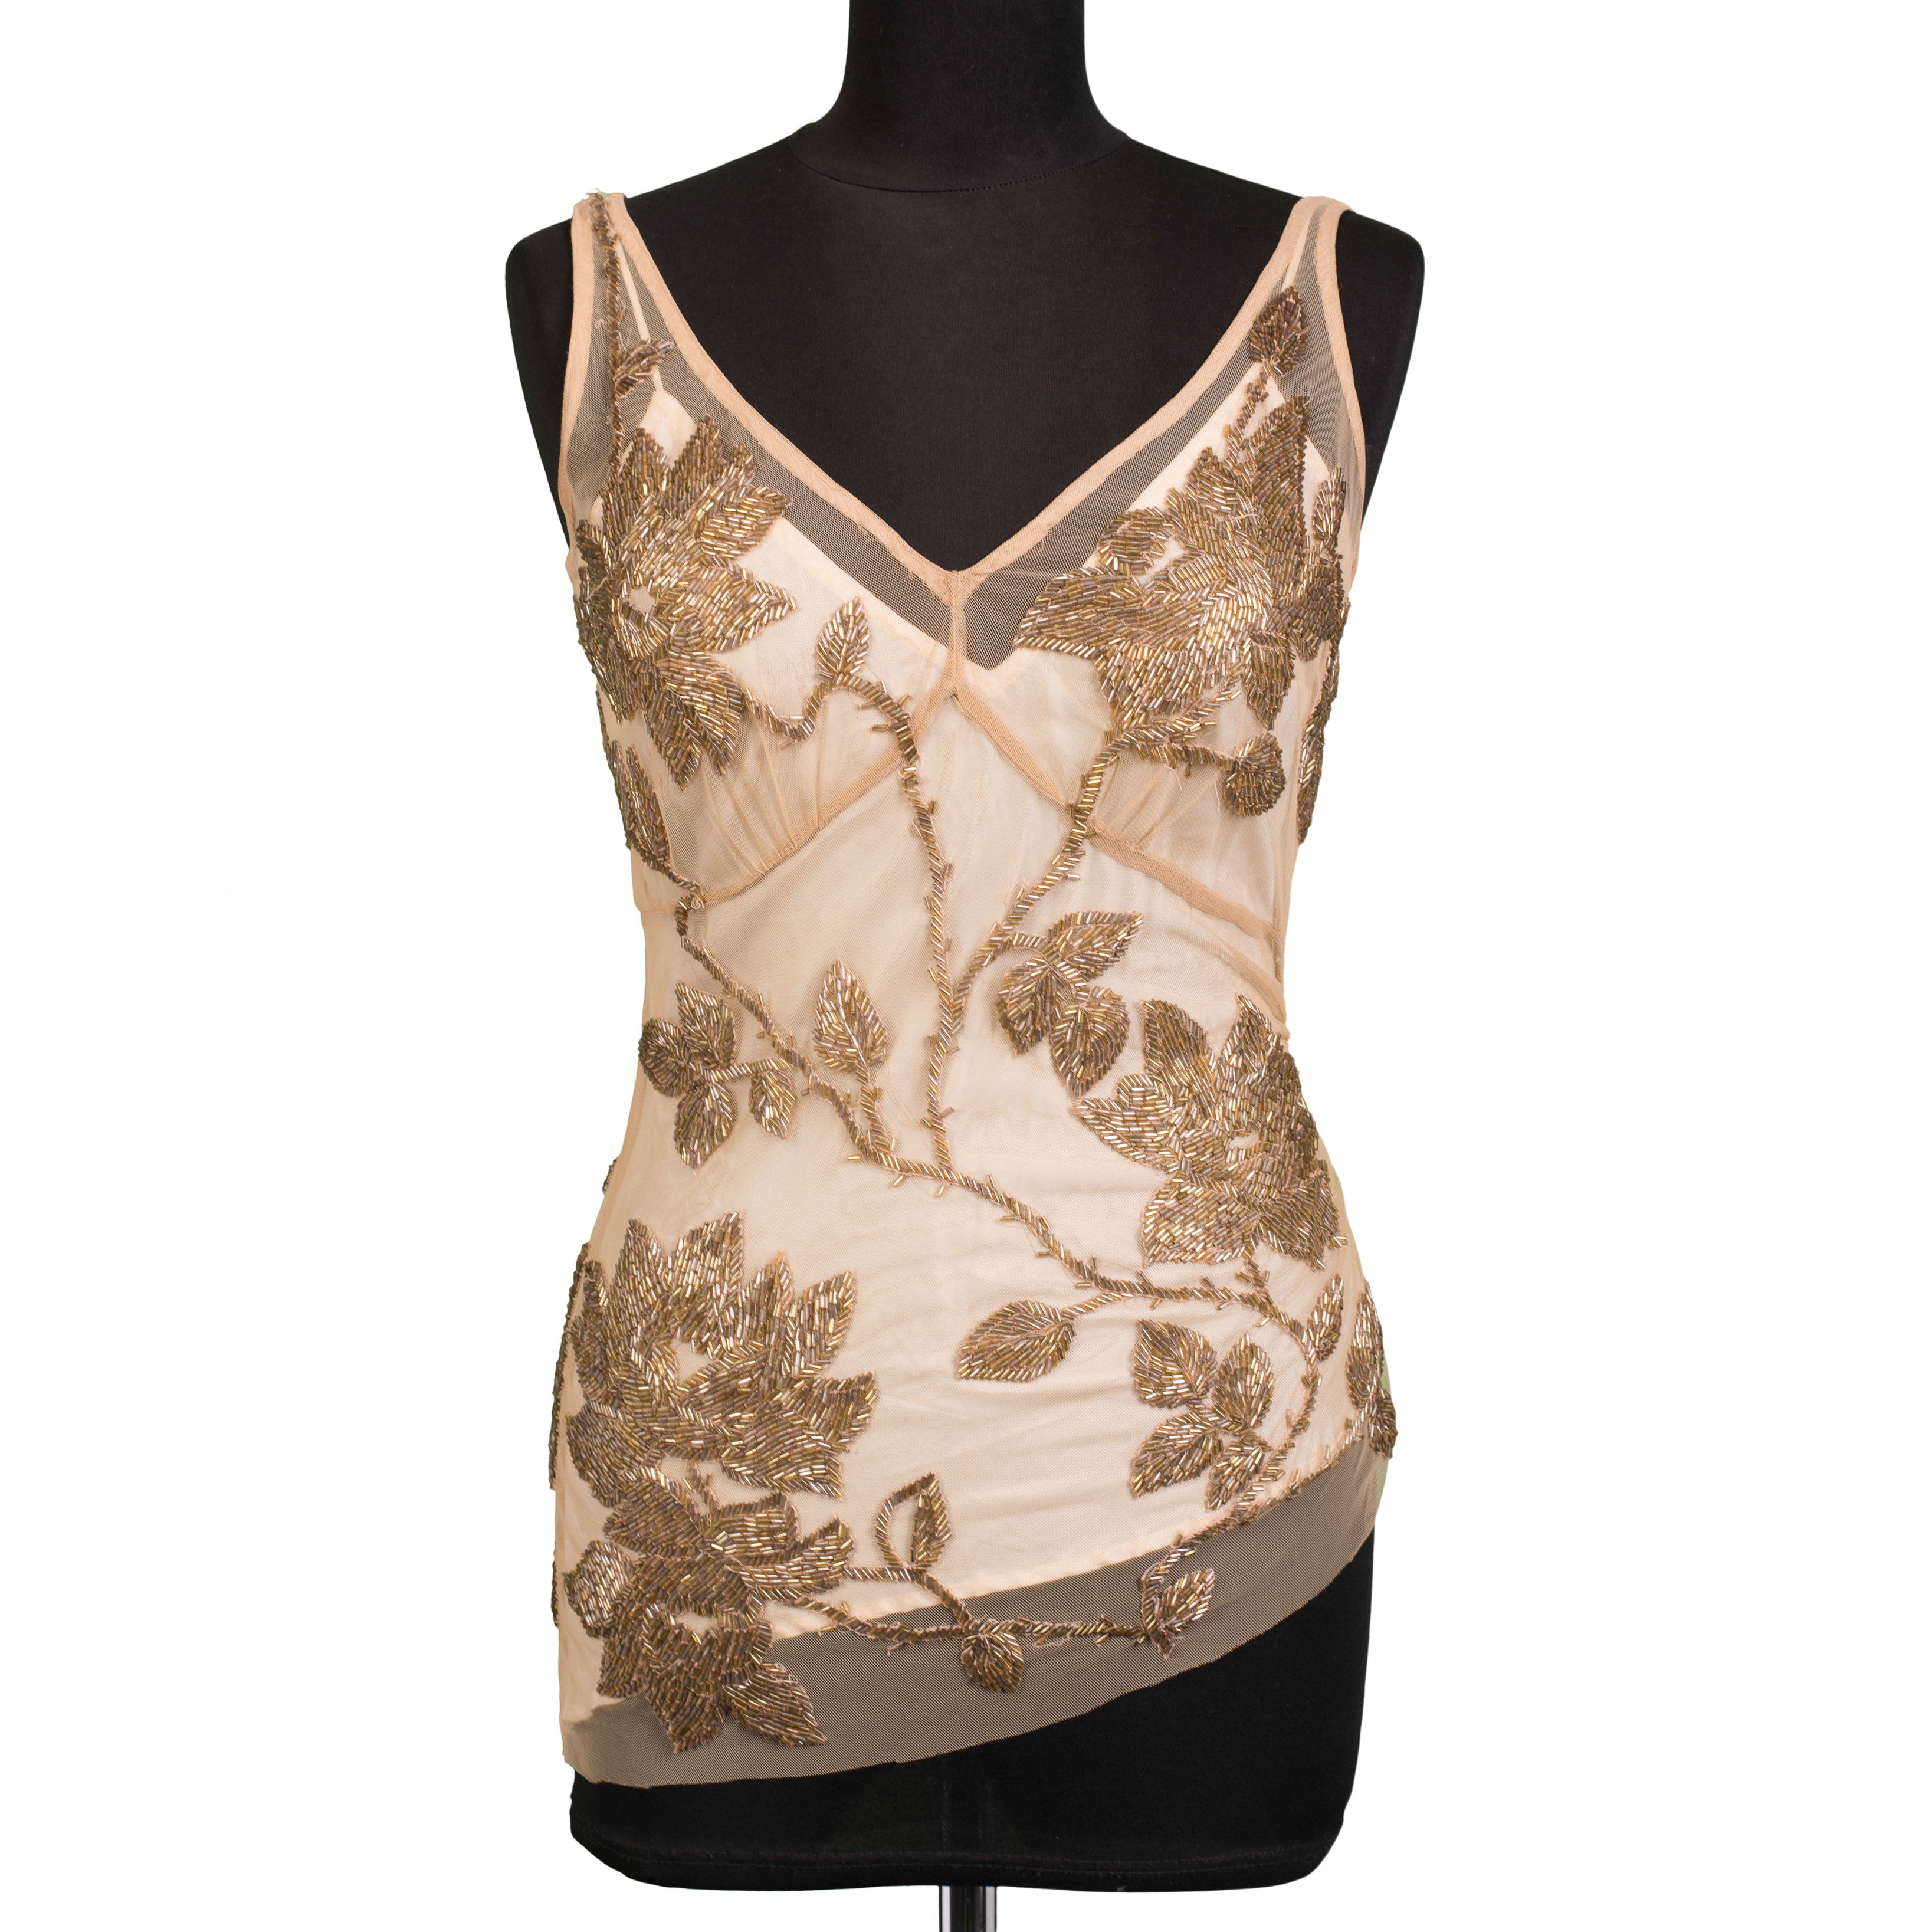 TRACY REESE Gold Floral Beaded Top with Silk Lining NEW US 4 WOMEN'S BOUTIQUE